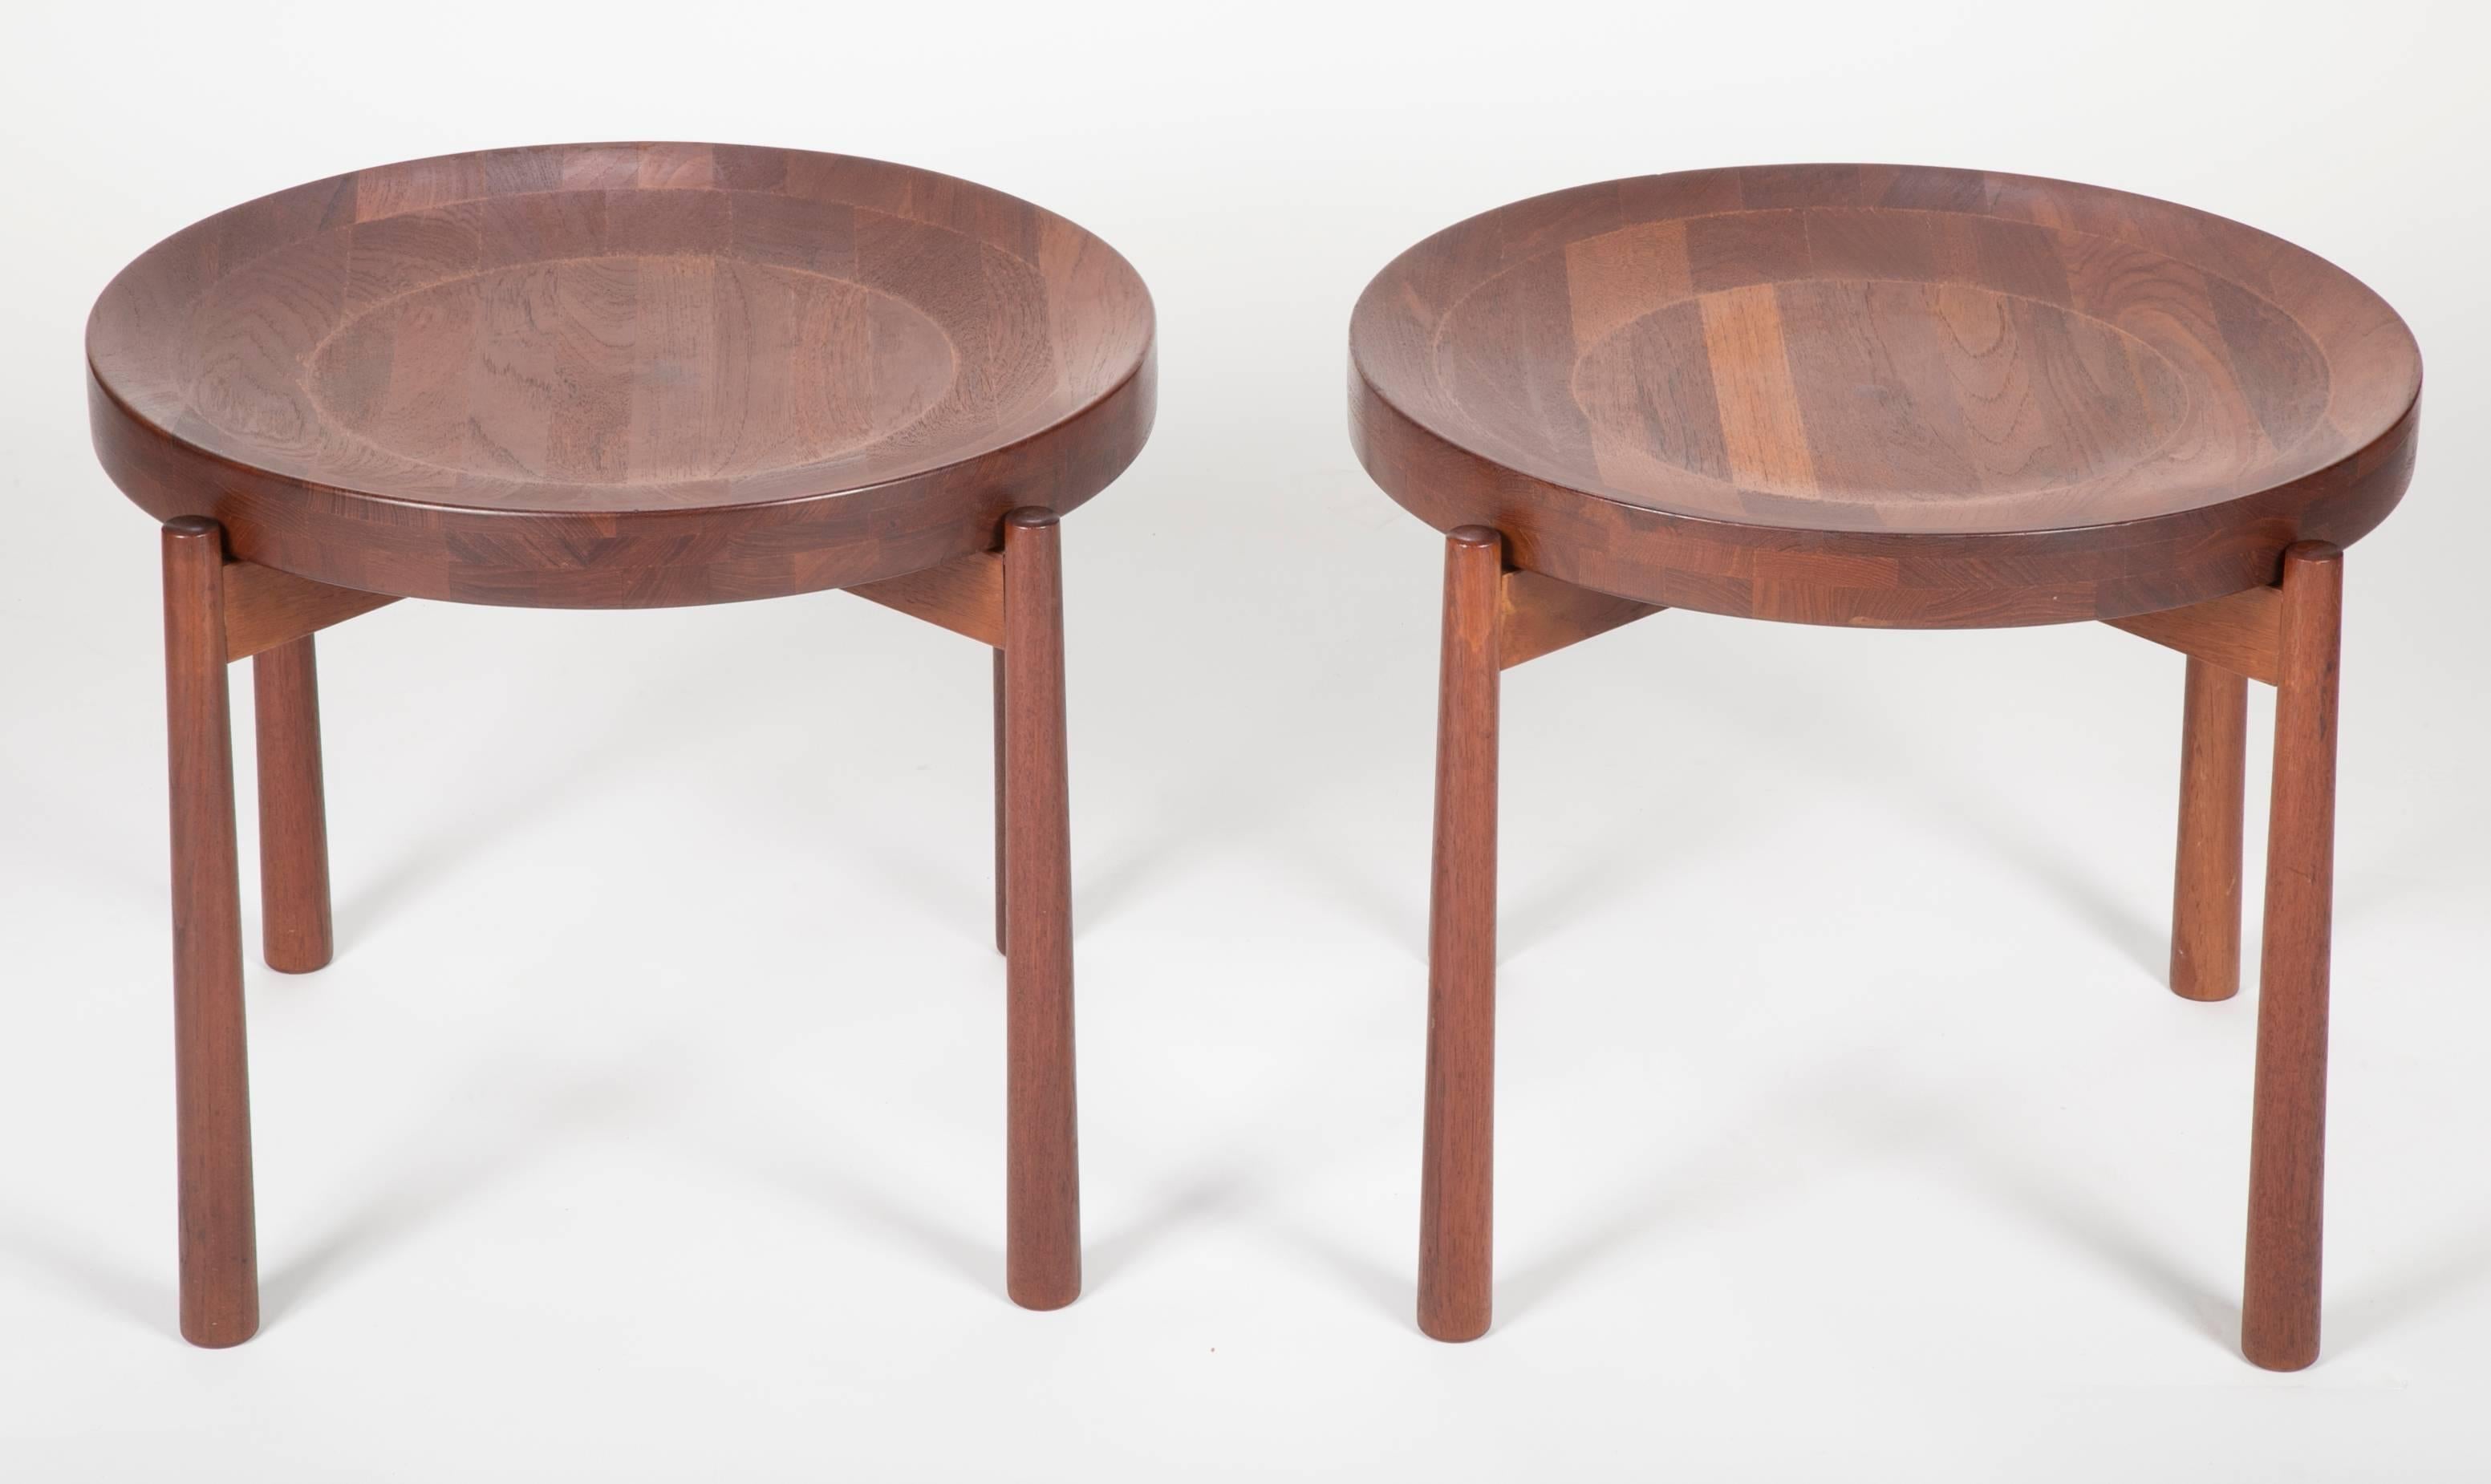 Estate fresh pair of teak flip-top side tables designed in the style of Danish designer Jens Quistgaard for DUX, Sweden, circa 1965. The solid teak tops are concave on one side and flat on the other.

Jens Harald Quistgaard (April 23, 1919 – January